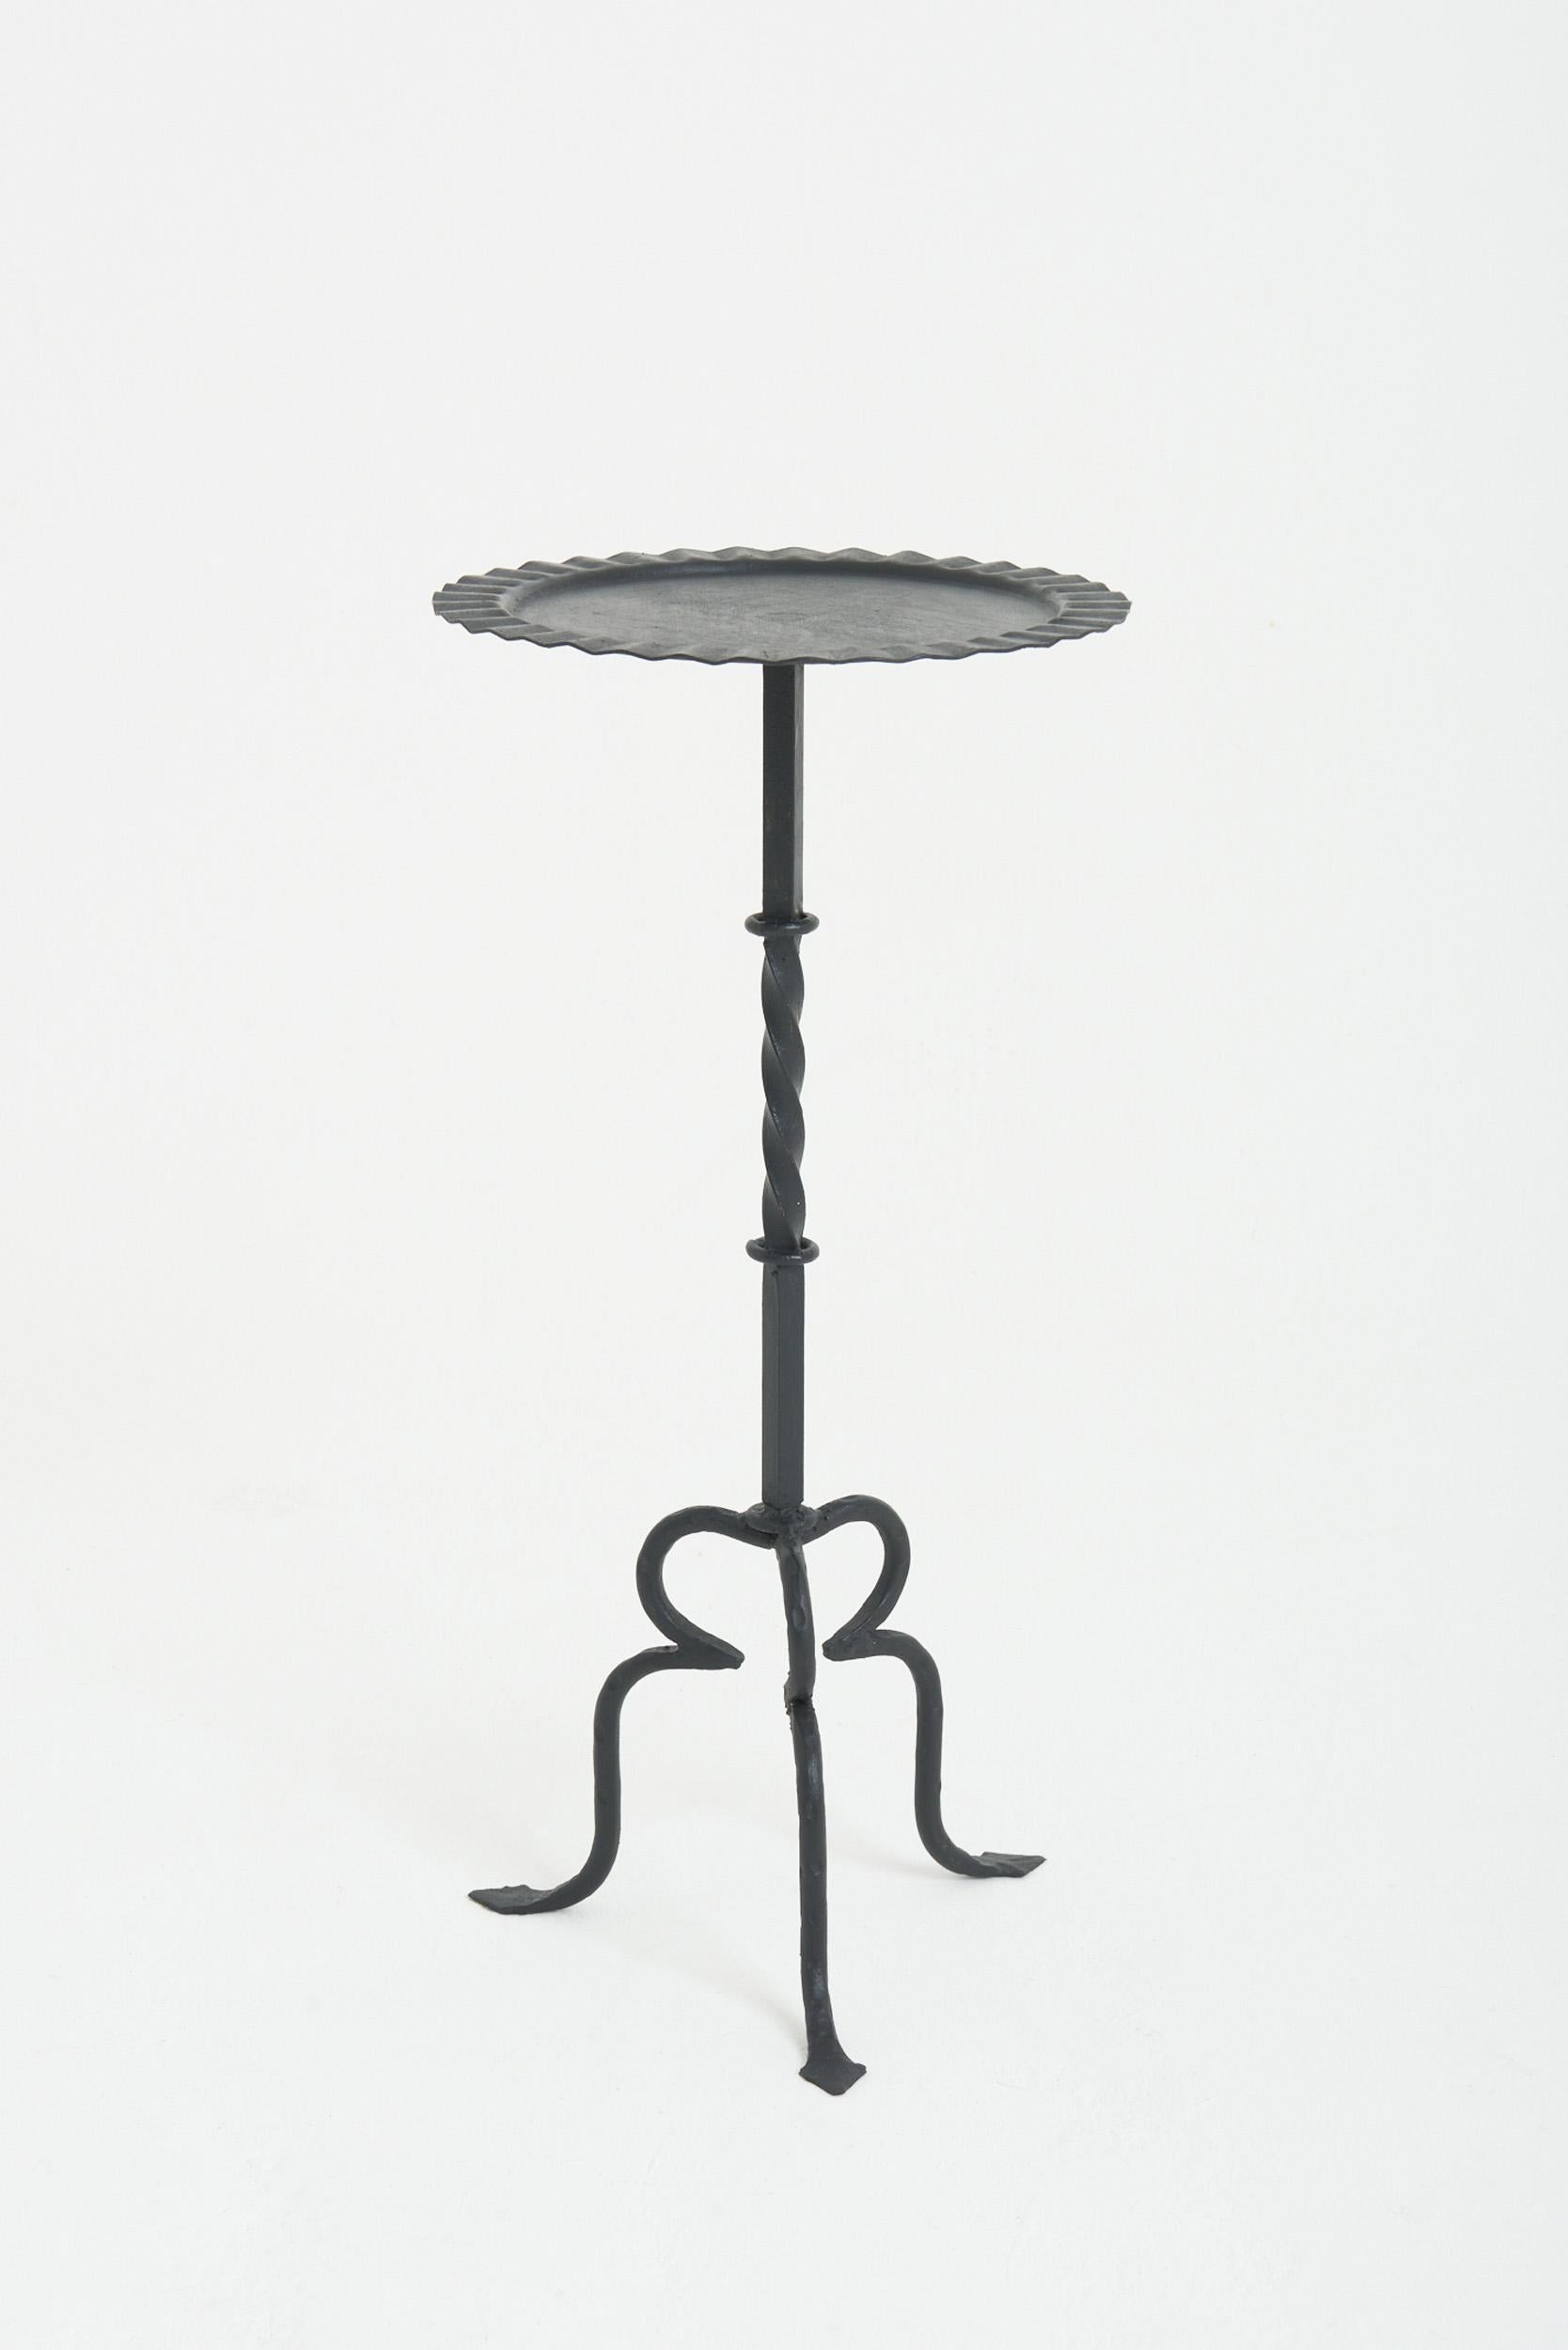 A black patinated wrought iron martini table.
Spain, third quarter of the 20th Century
61.5 cm high by 29.5 cm diameter